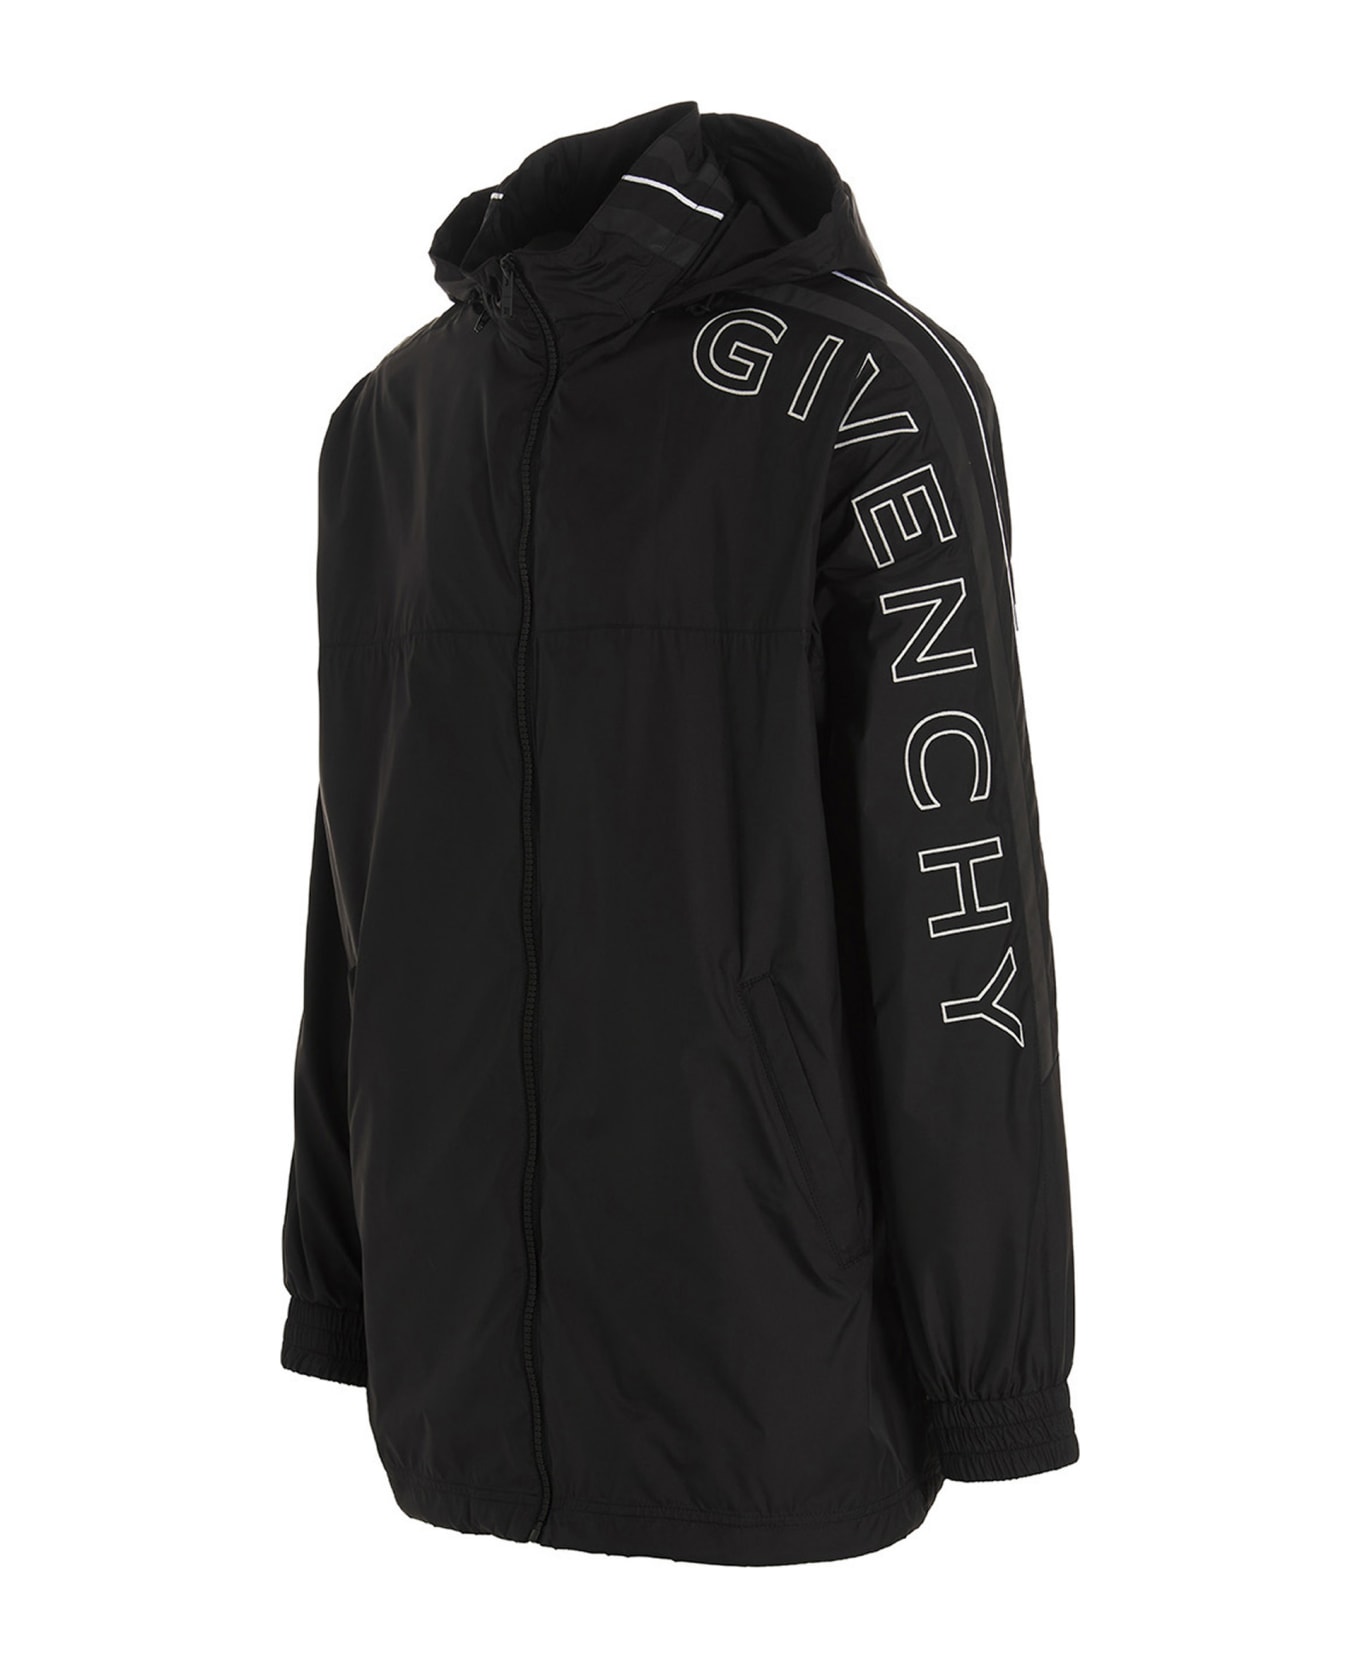 Givenchy tote Embroidered Logo Jacket - Black  